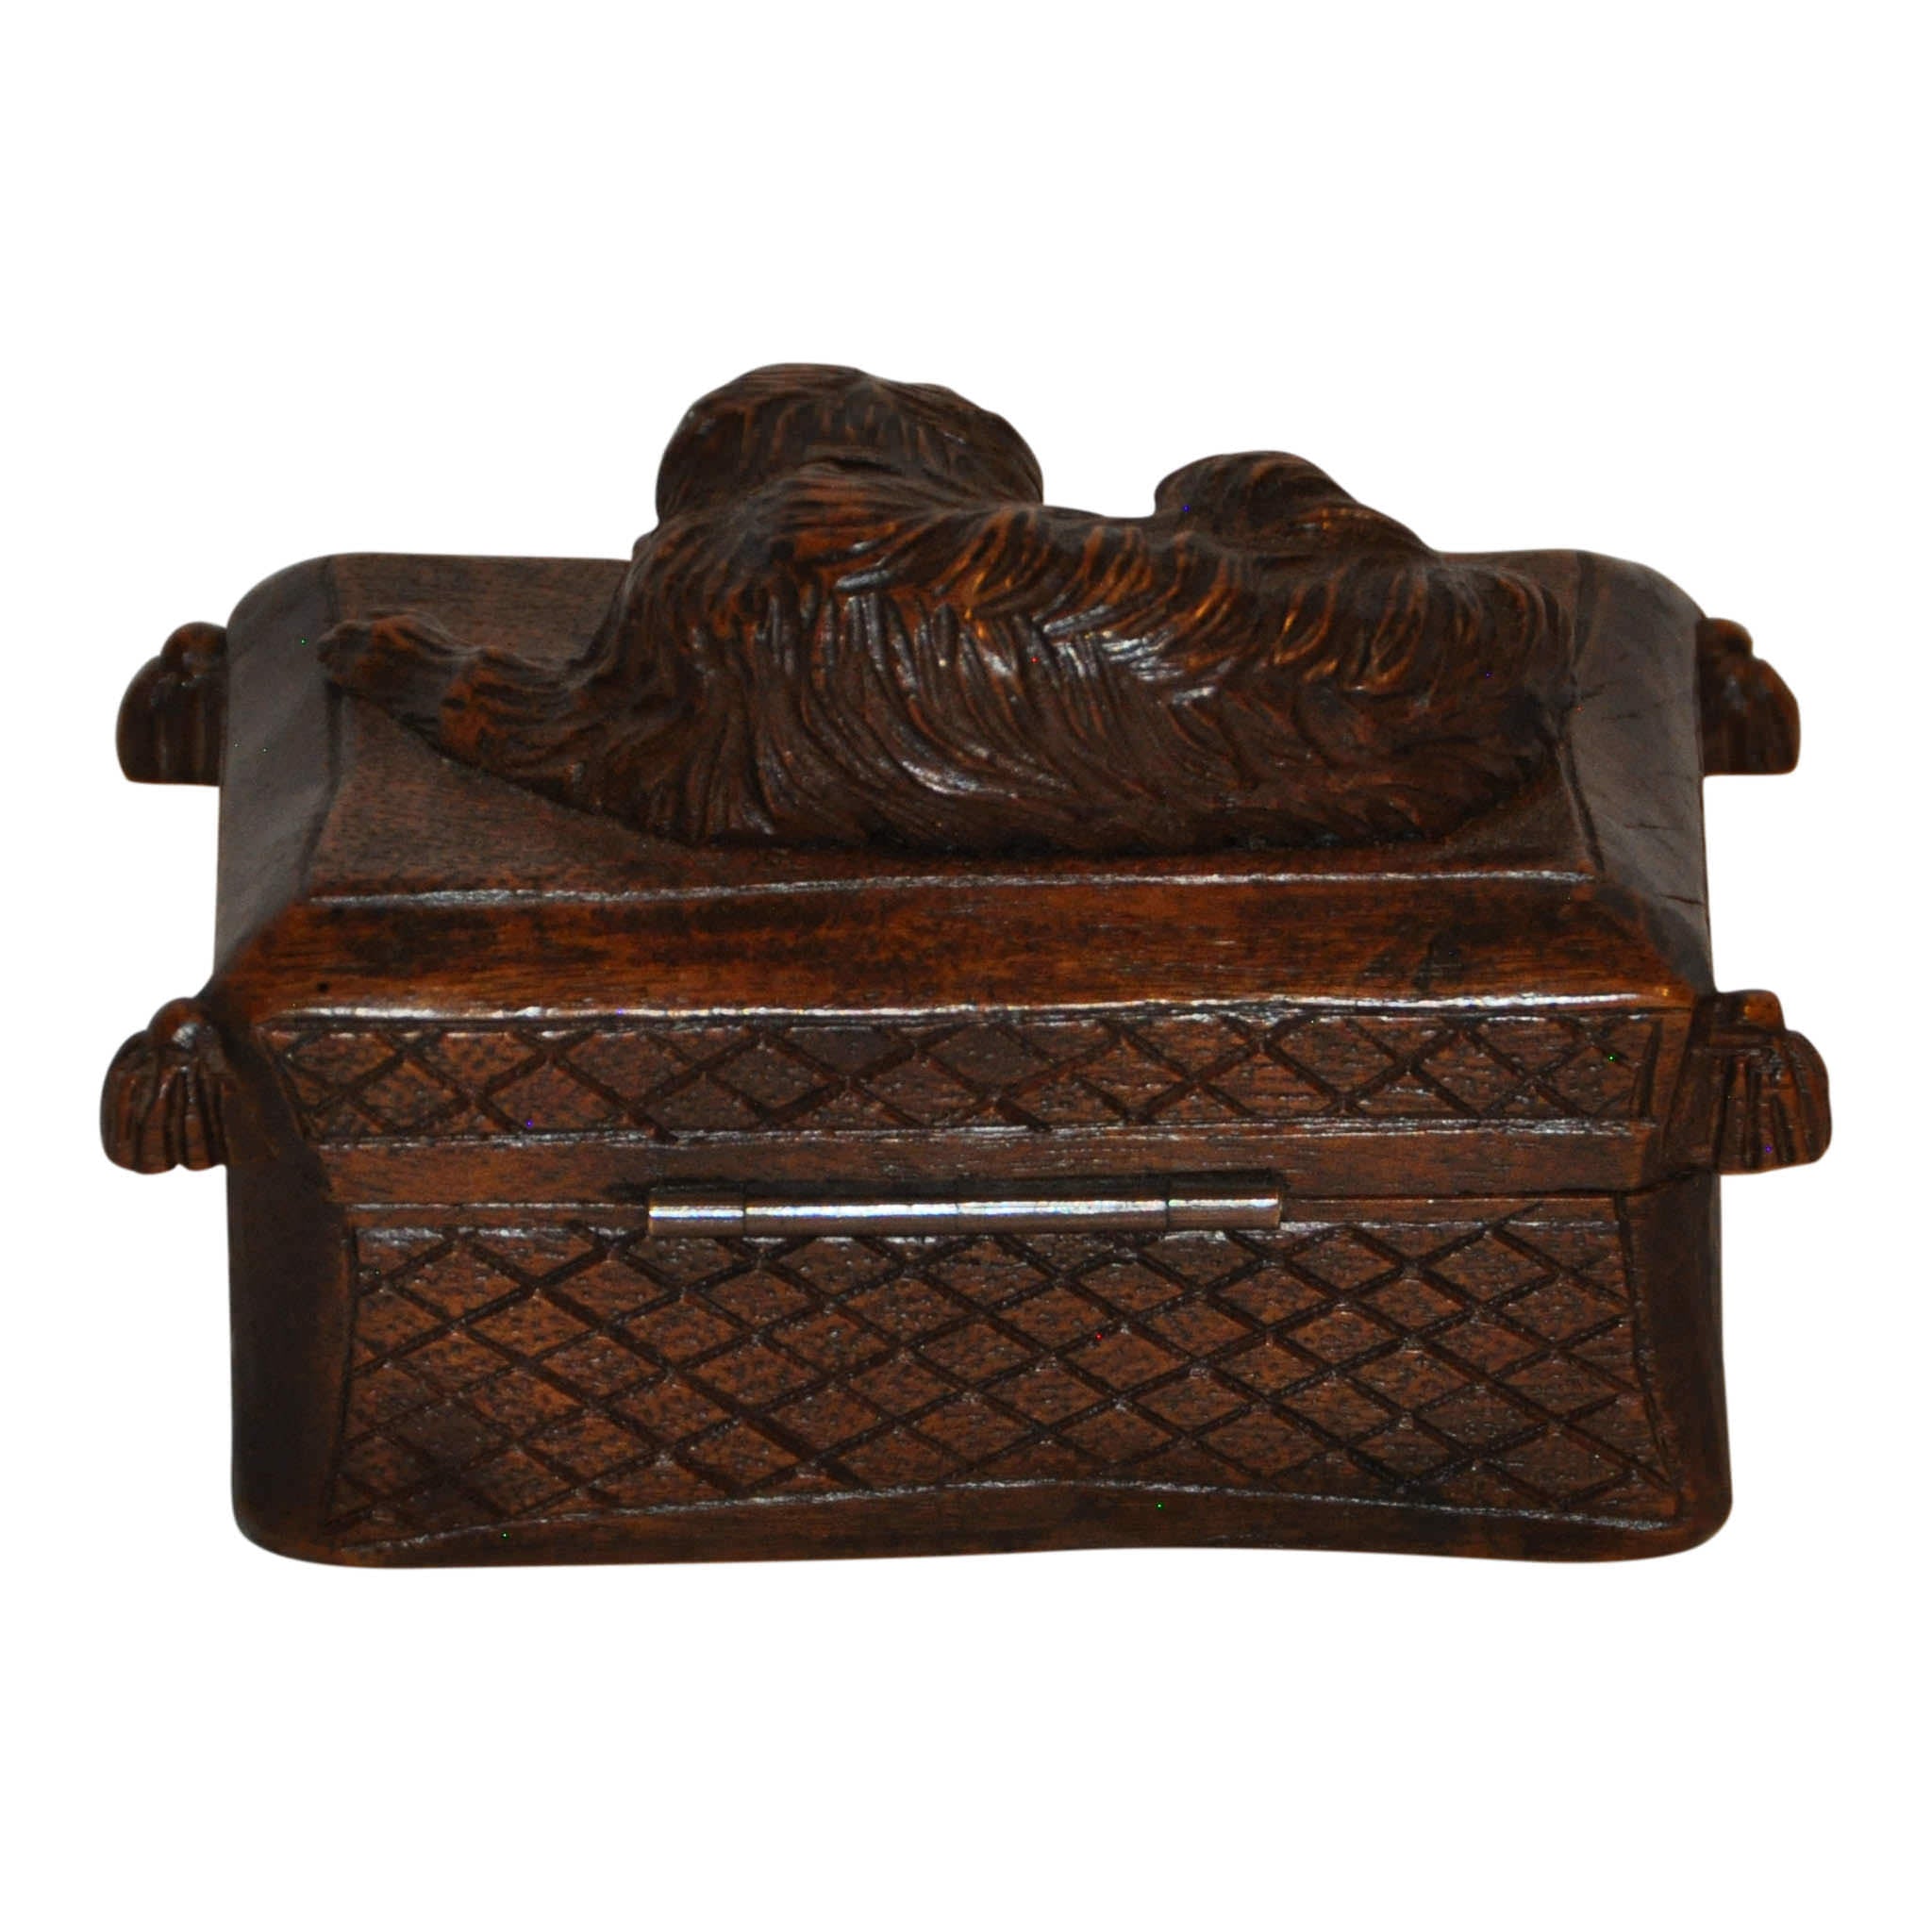 Carved Box with Dog